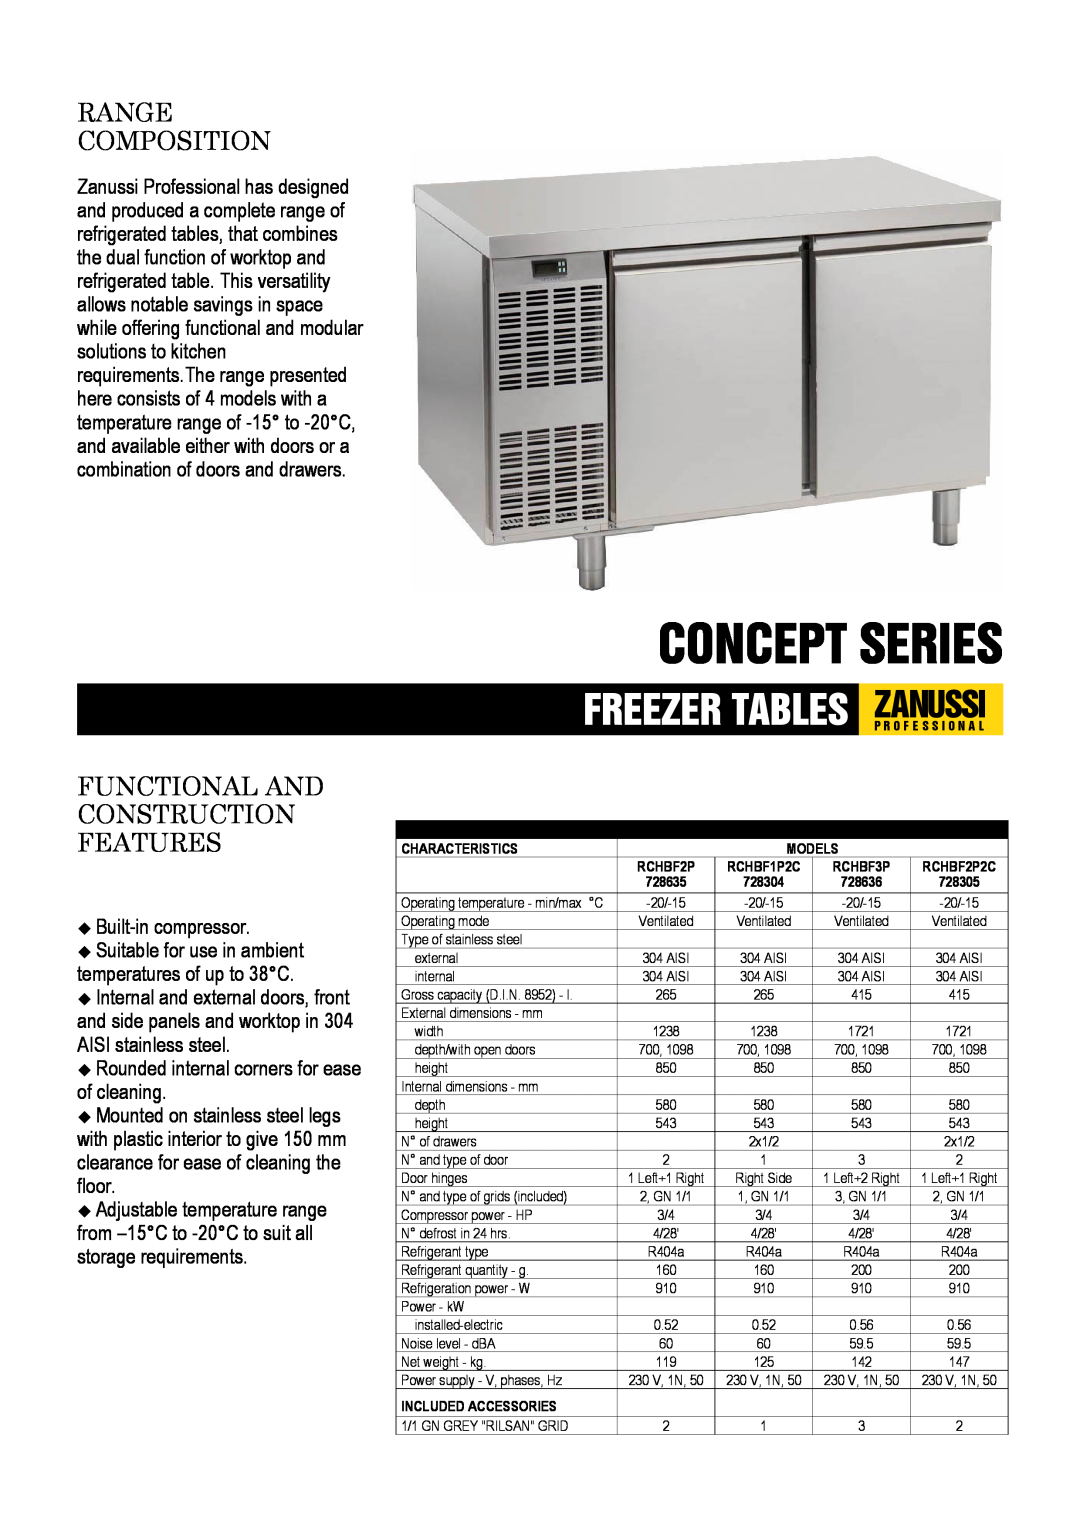 Zanussi 728305, RCHBF2P2C, 728304, 728635 dimensions Concept Series, Range Composition, Functional And Construction Features 